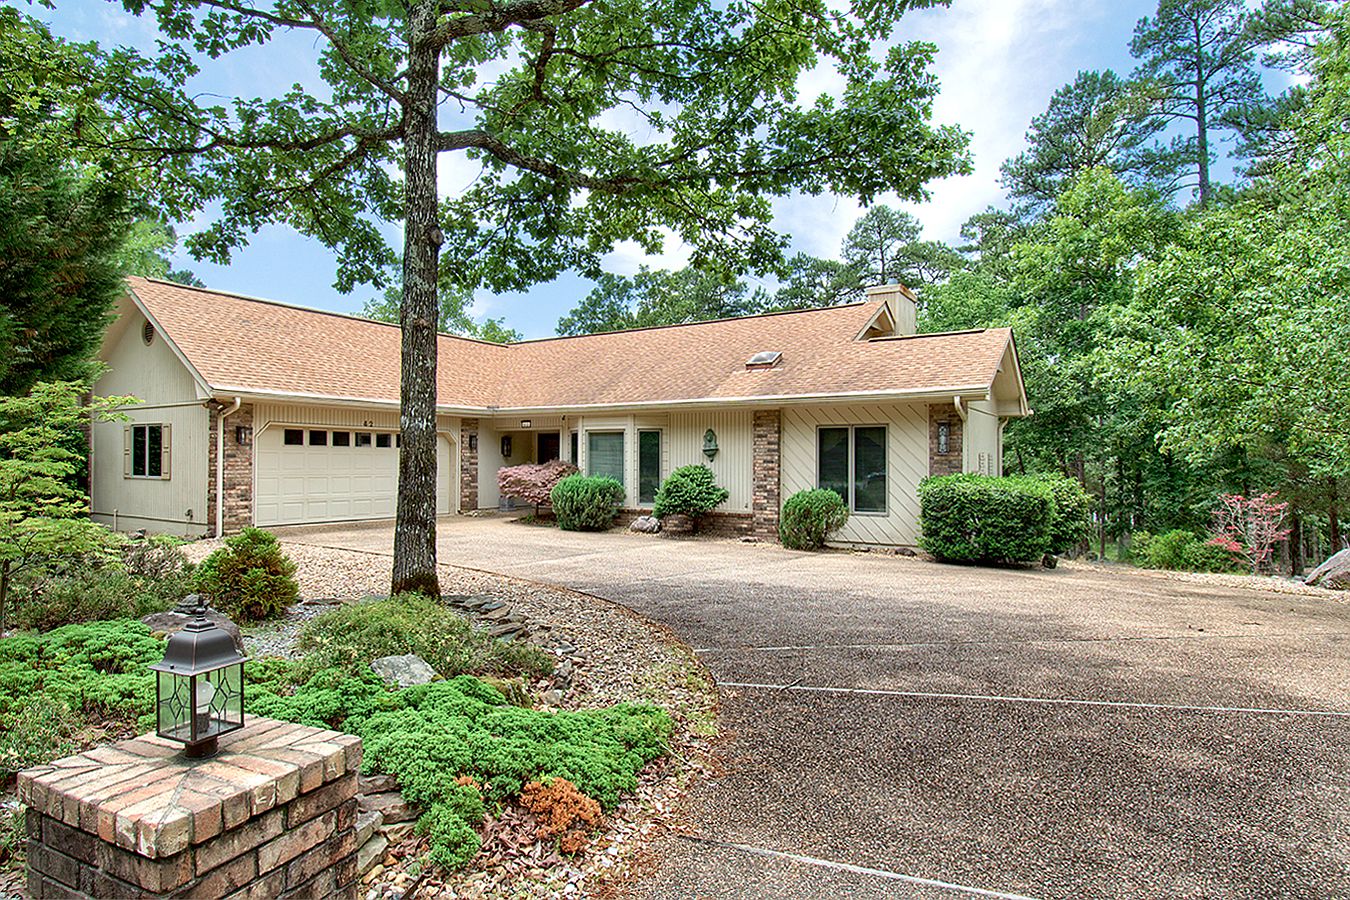 42 Promesa Dr Hot Springs Village Ar 71909 Zillow